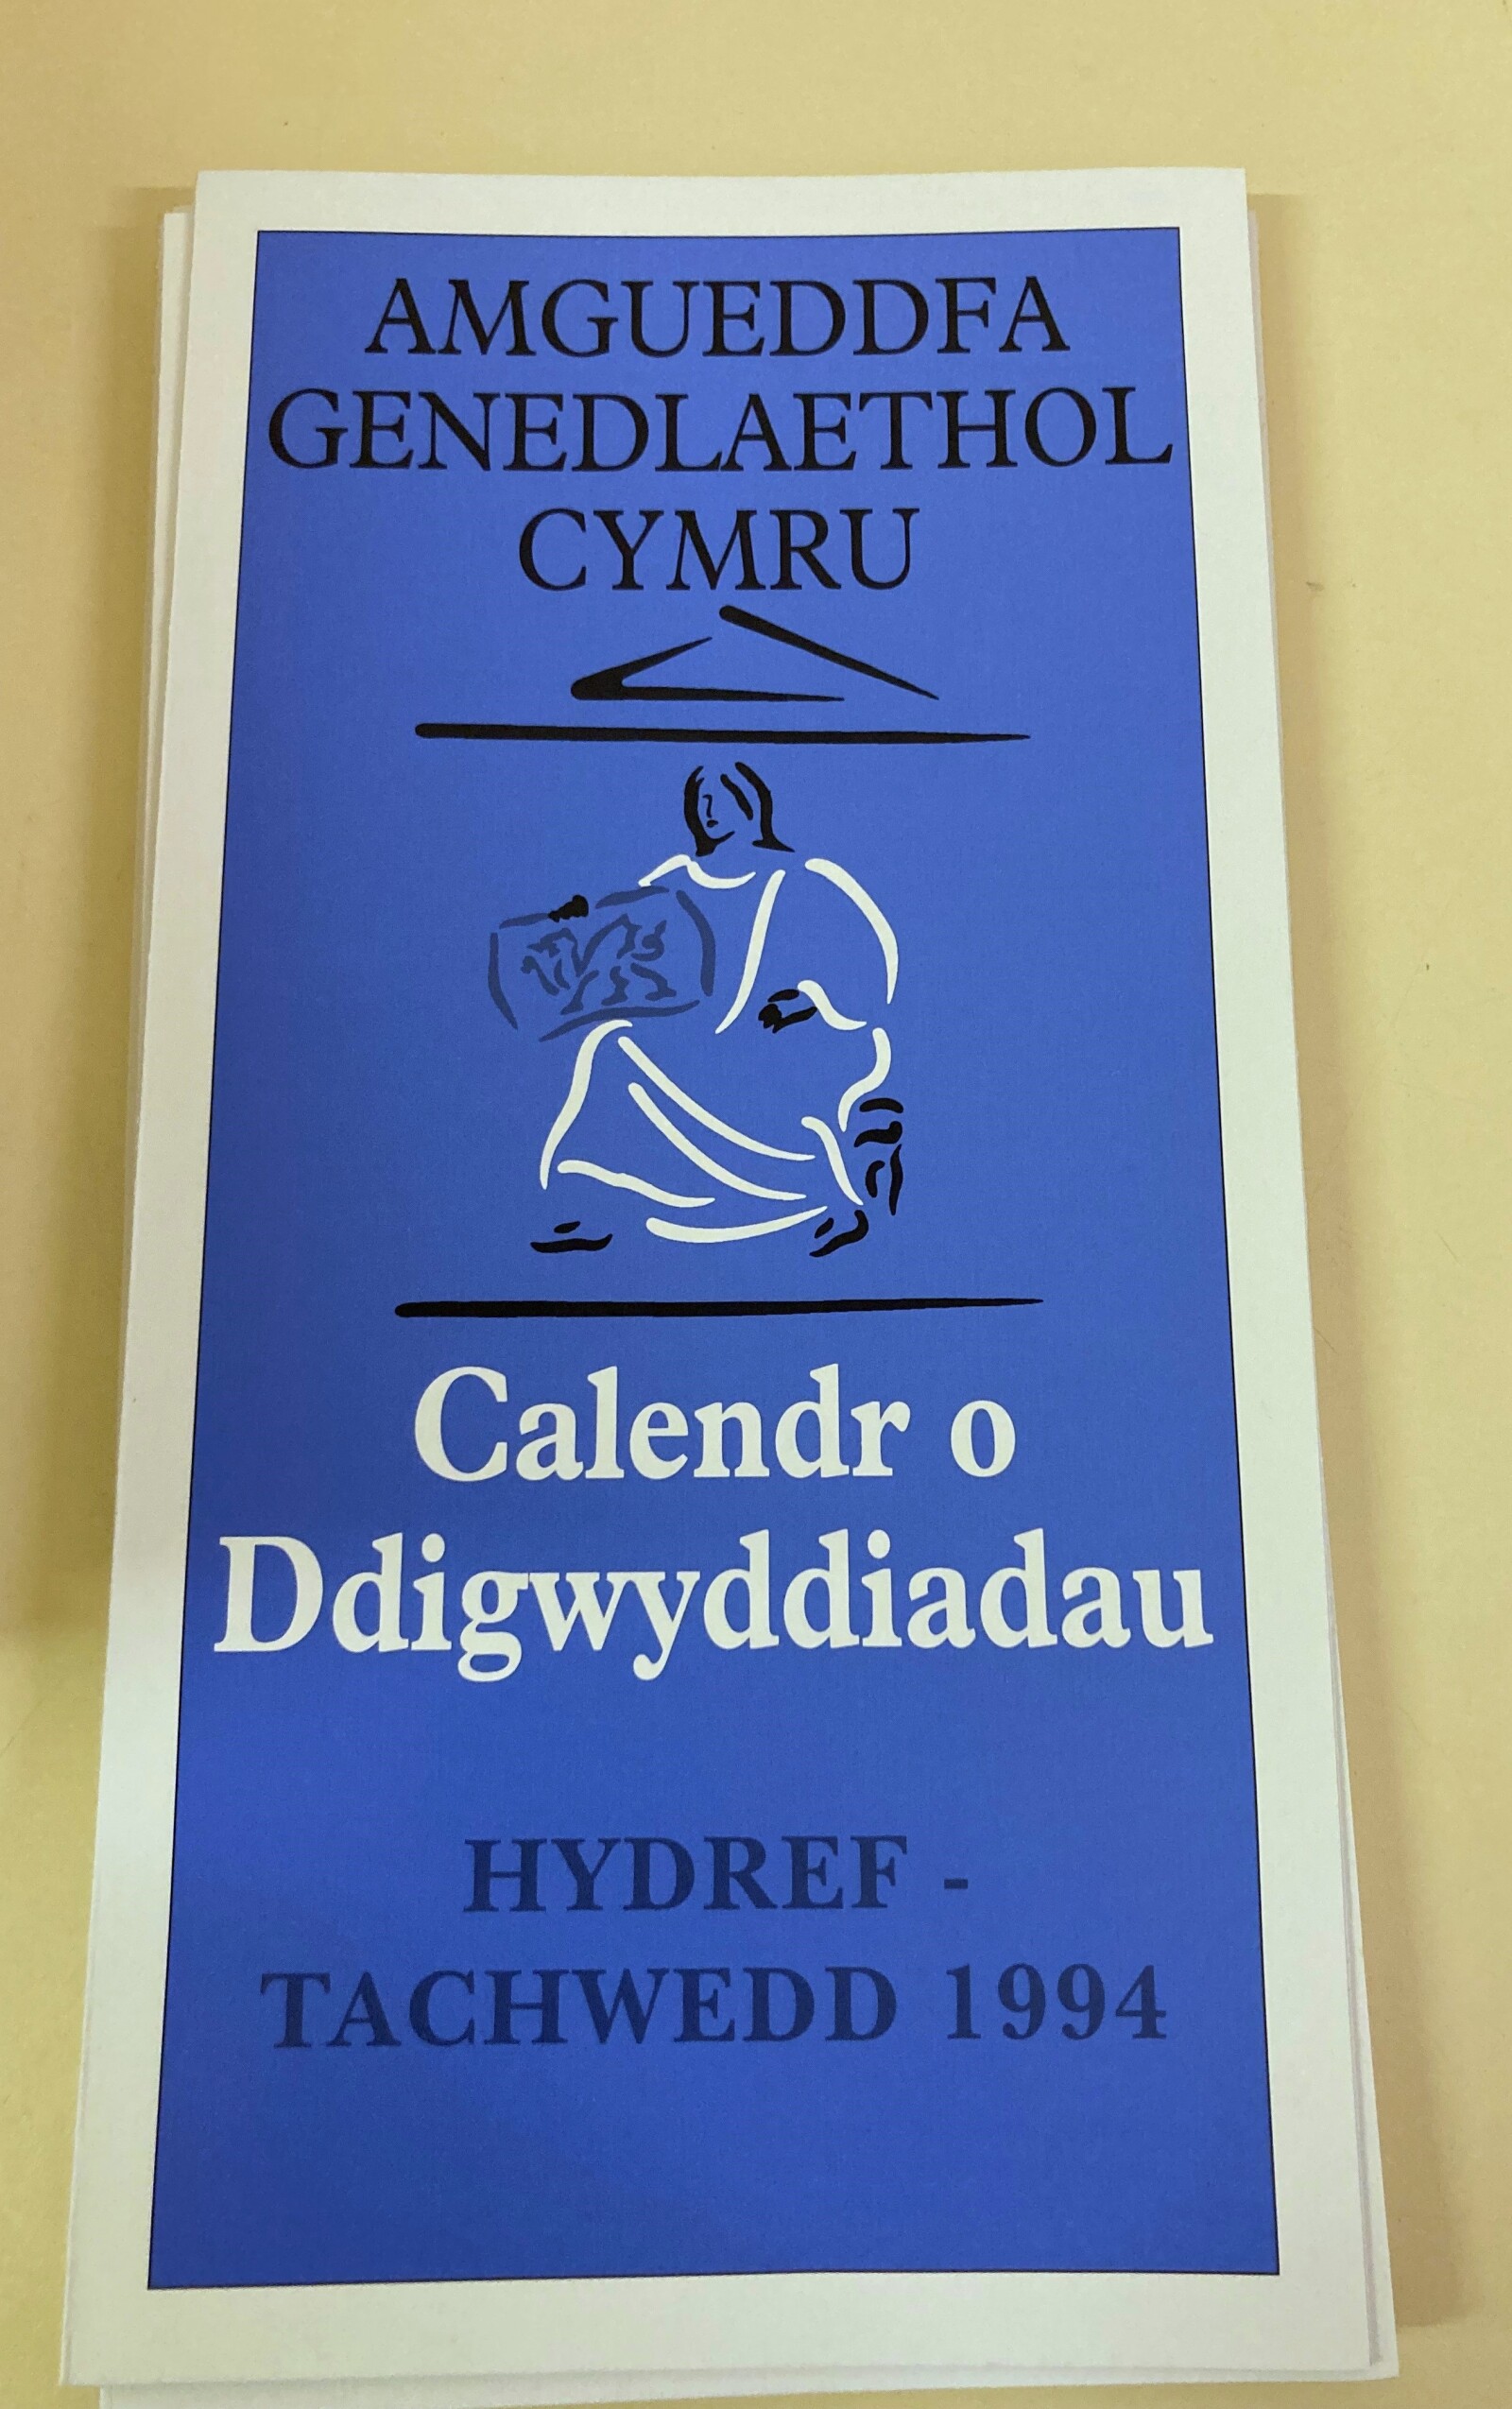 A blue museum leaflet with a line drawing of a woman in white robes holding a welsh flag